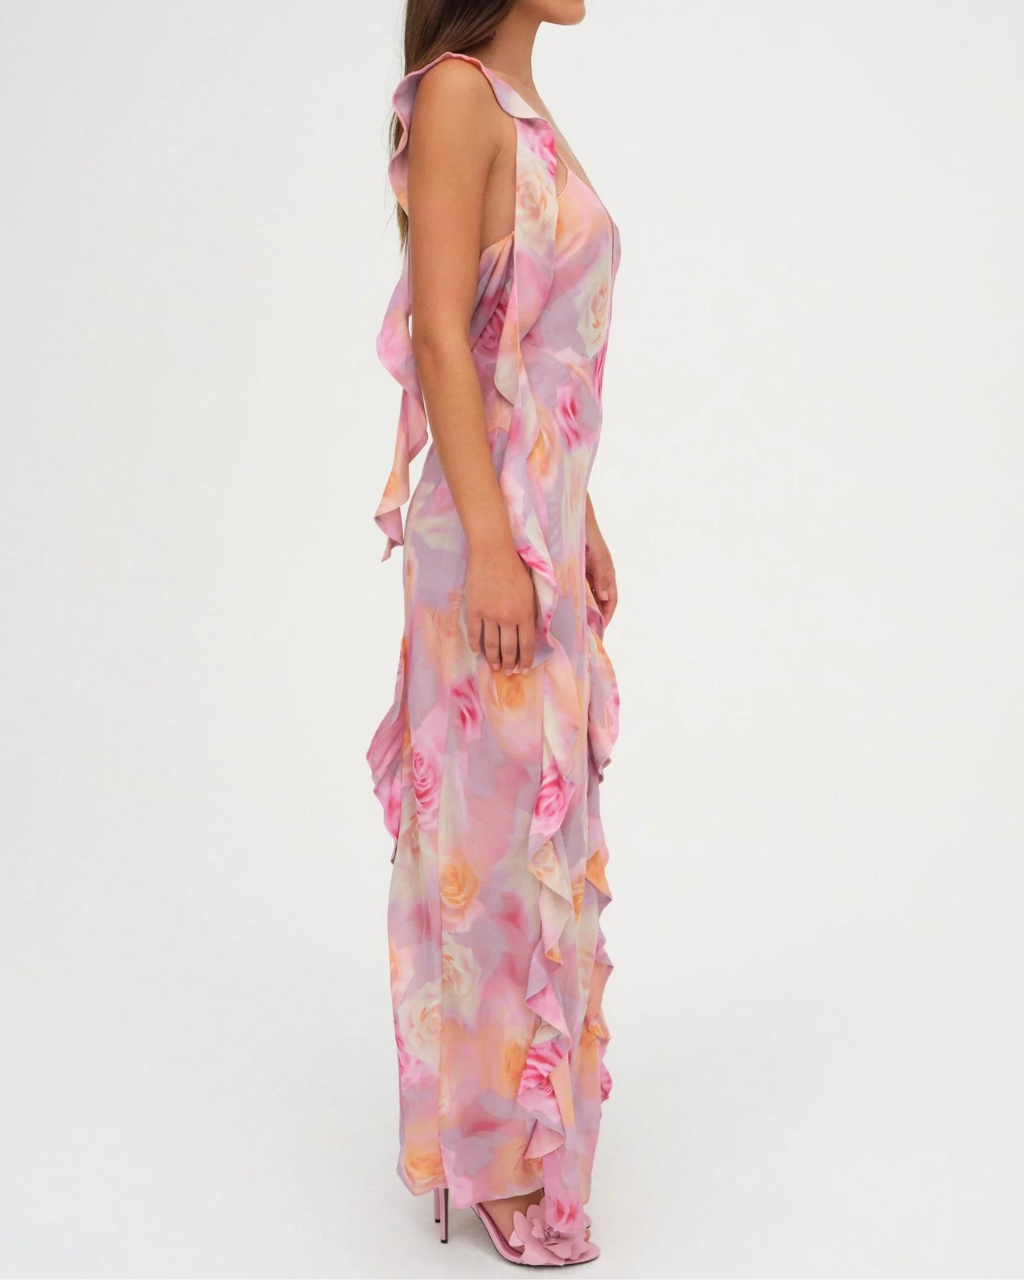 Beate Maxi Dress, Maxi Dress by For Love and Lemons | LIT Boutique